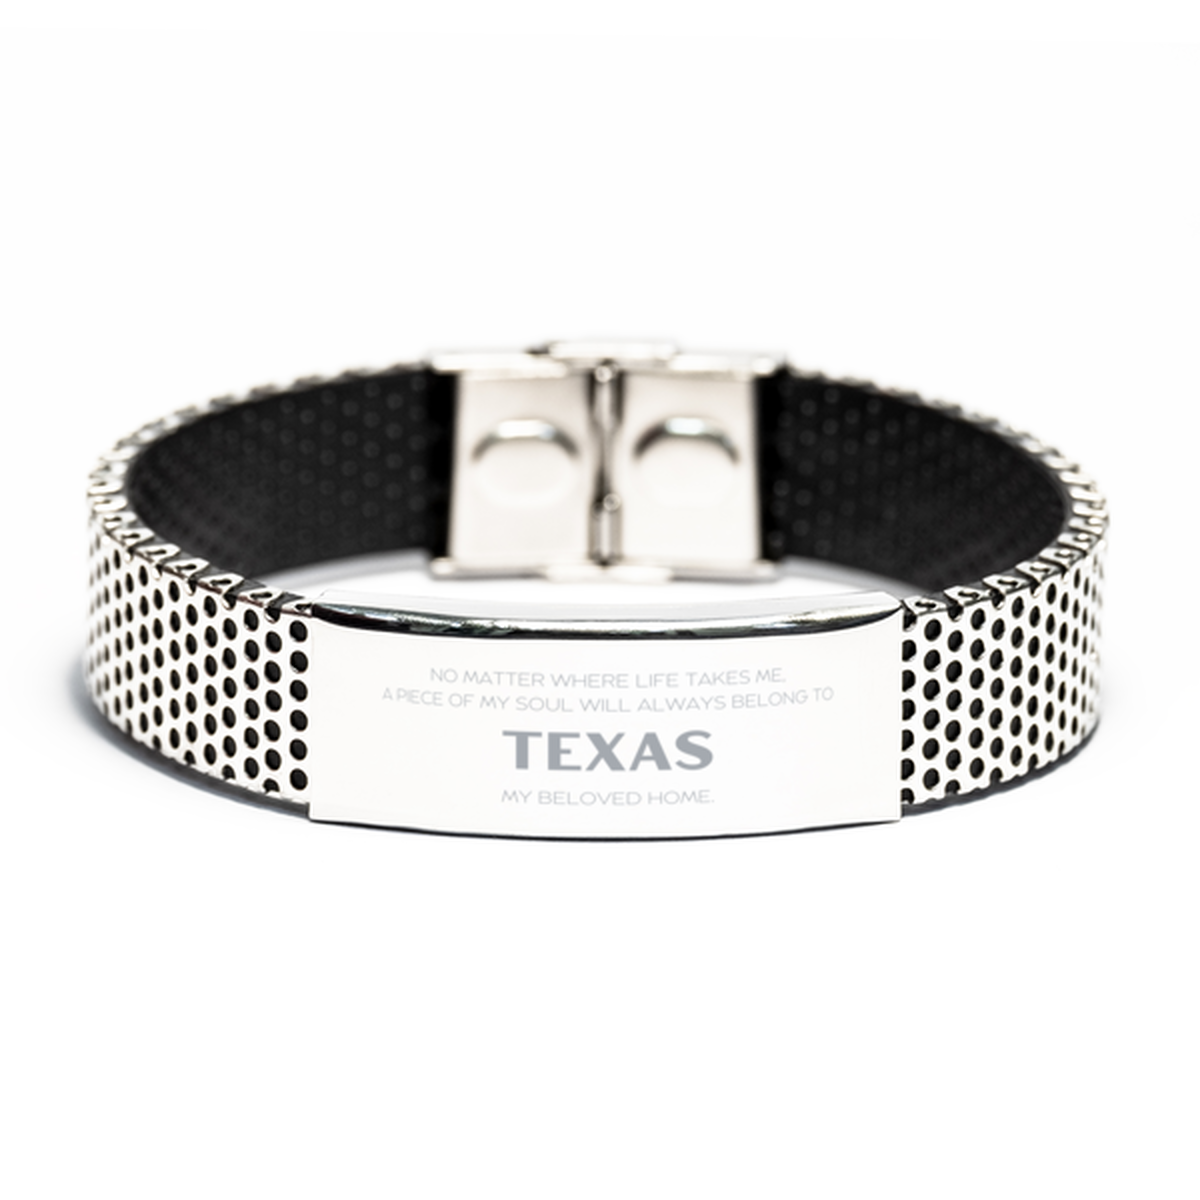 Love Texas State Gifts, My soul will always belong to Texas, Proud Stainless Steel Bracelet, Birthday Unique Gifts For Texas Men, Women, Friends